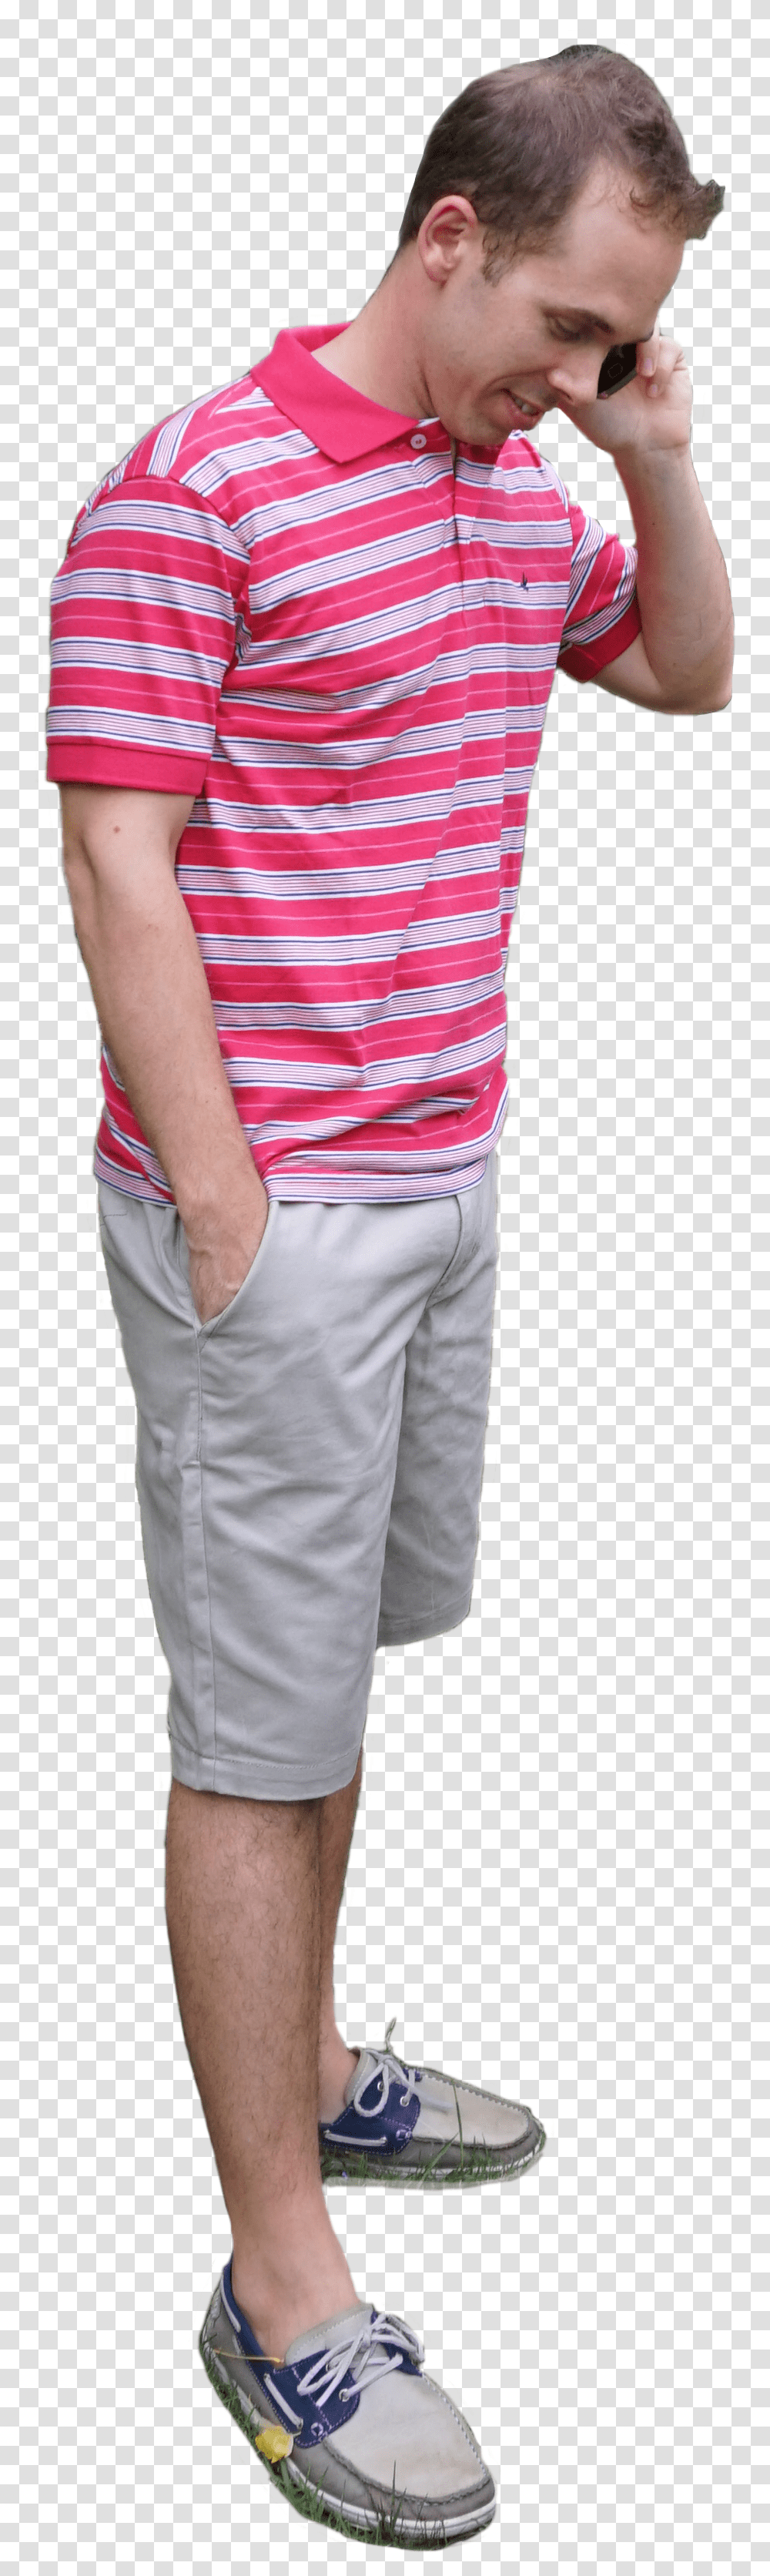 Casual People Polo Shirt, Person, Female, Pants Transparent Png